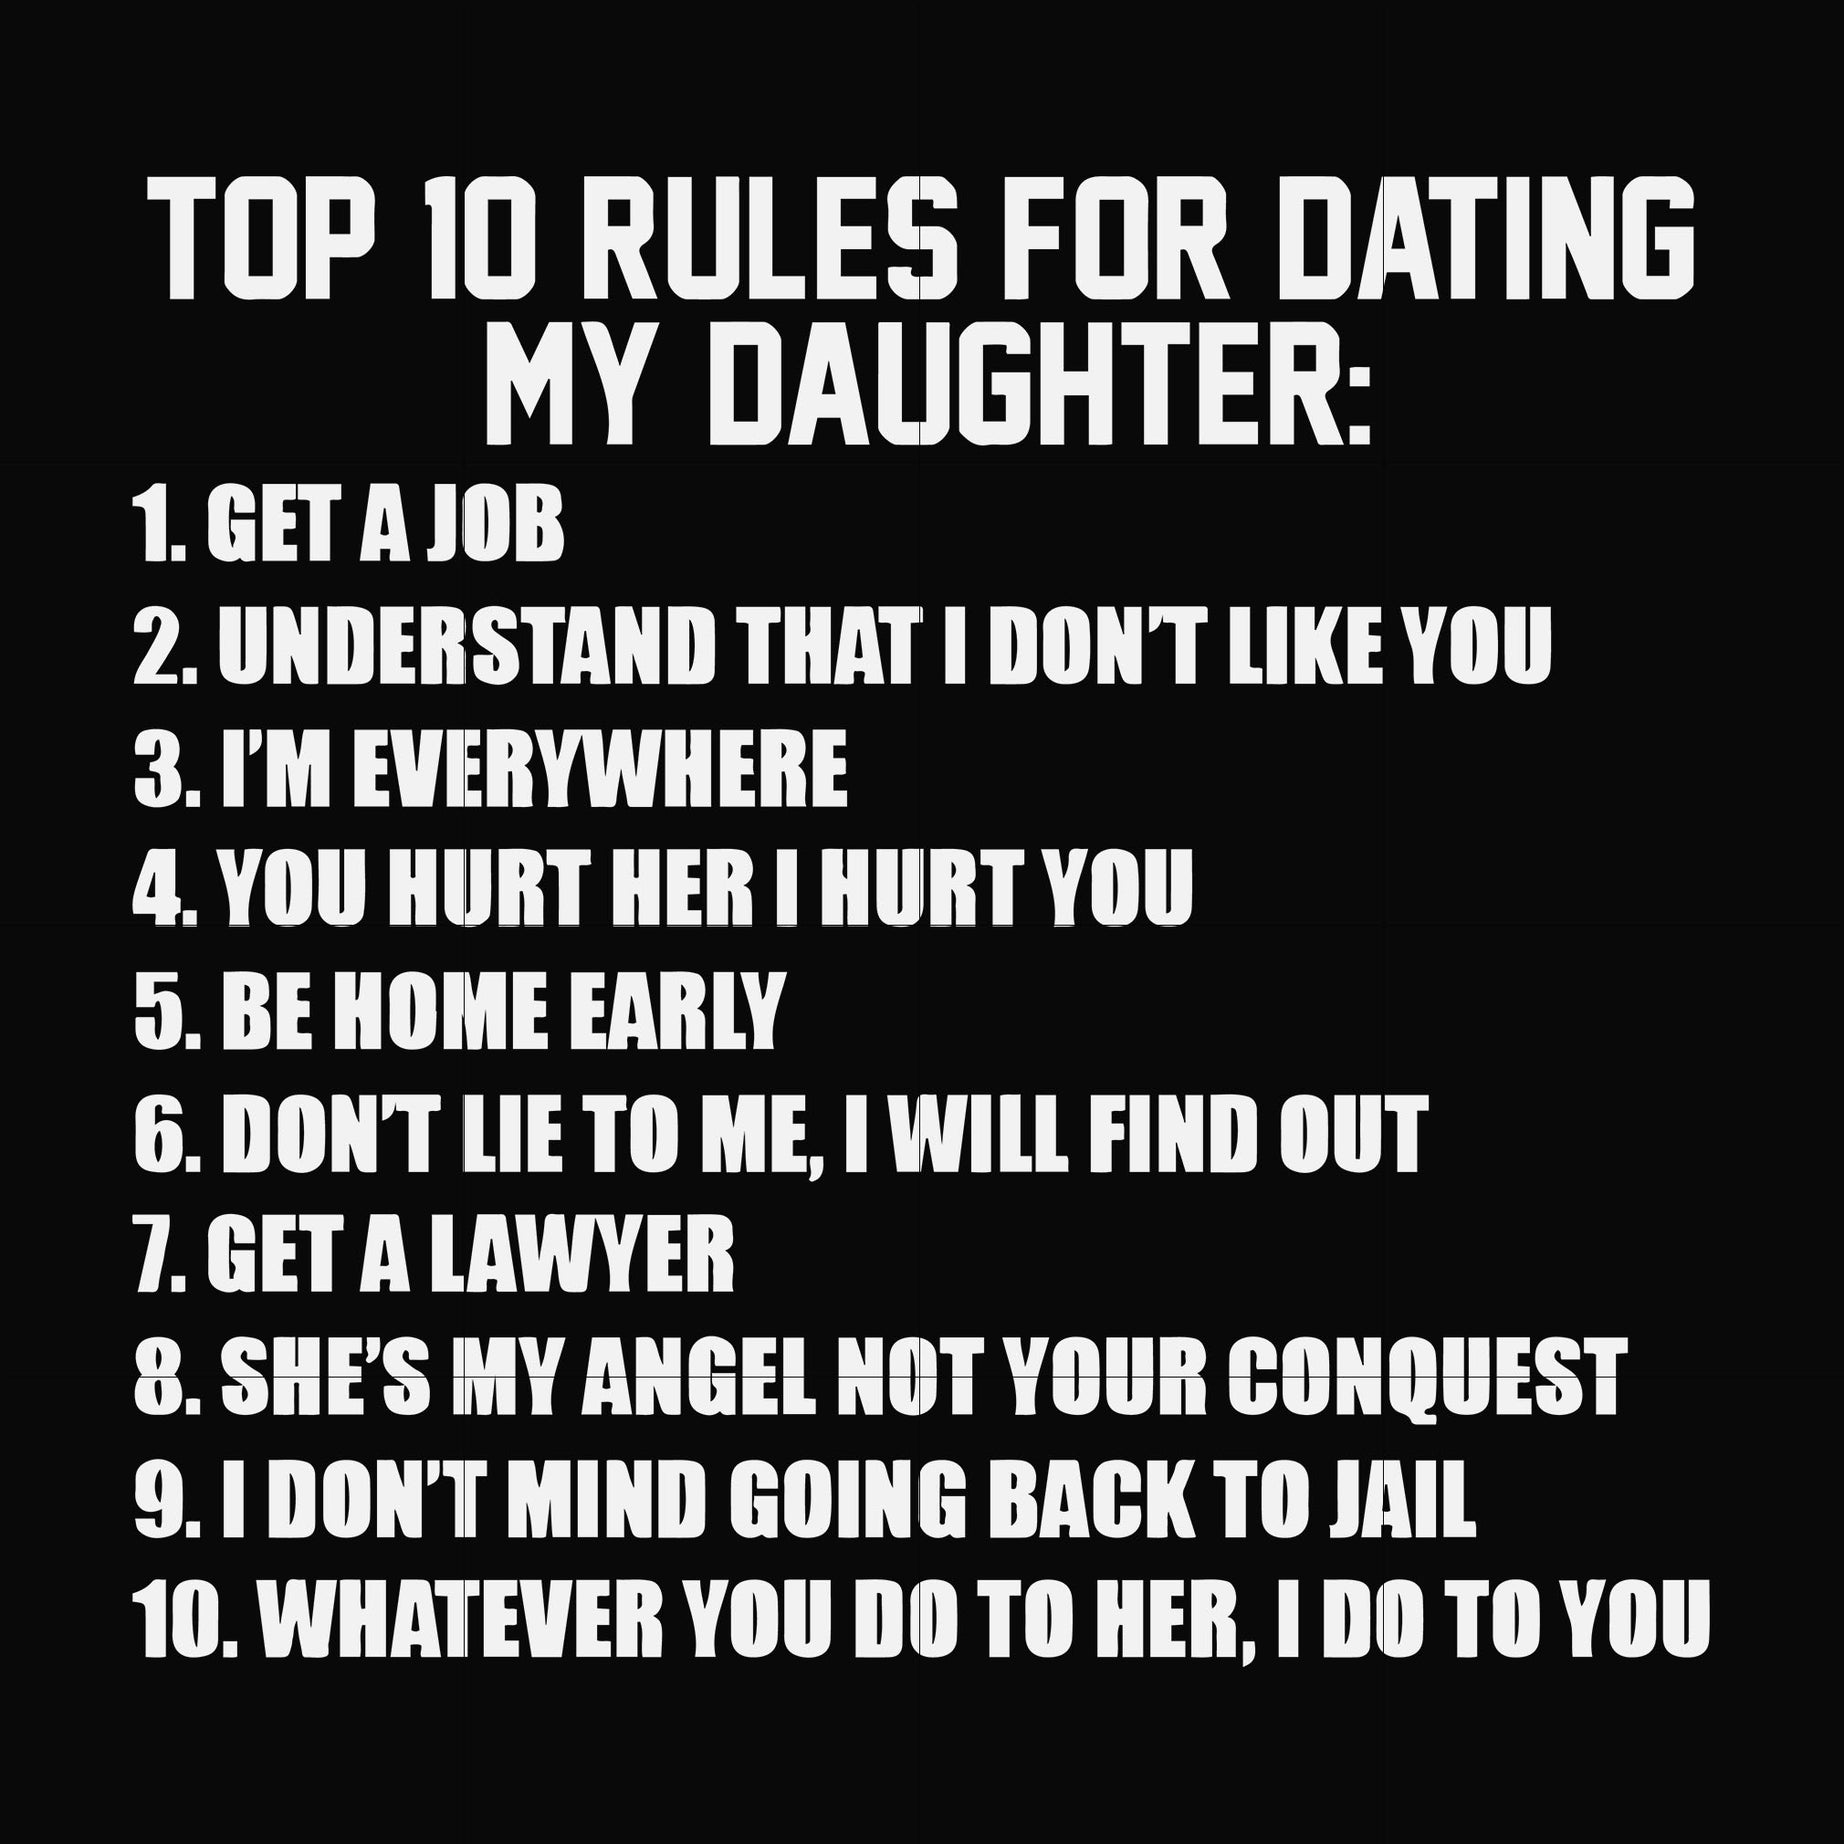 Top 10 rules for dating my daughter svg, png, dxf, eps file FN000622